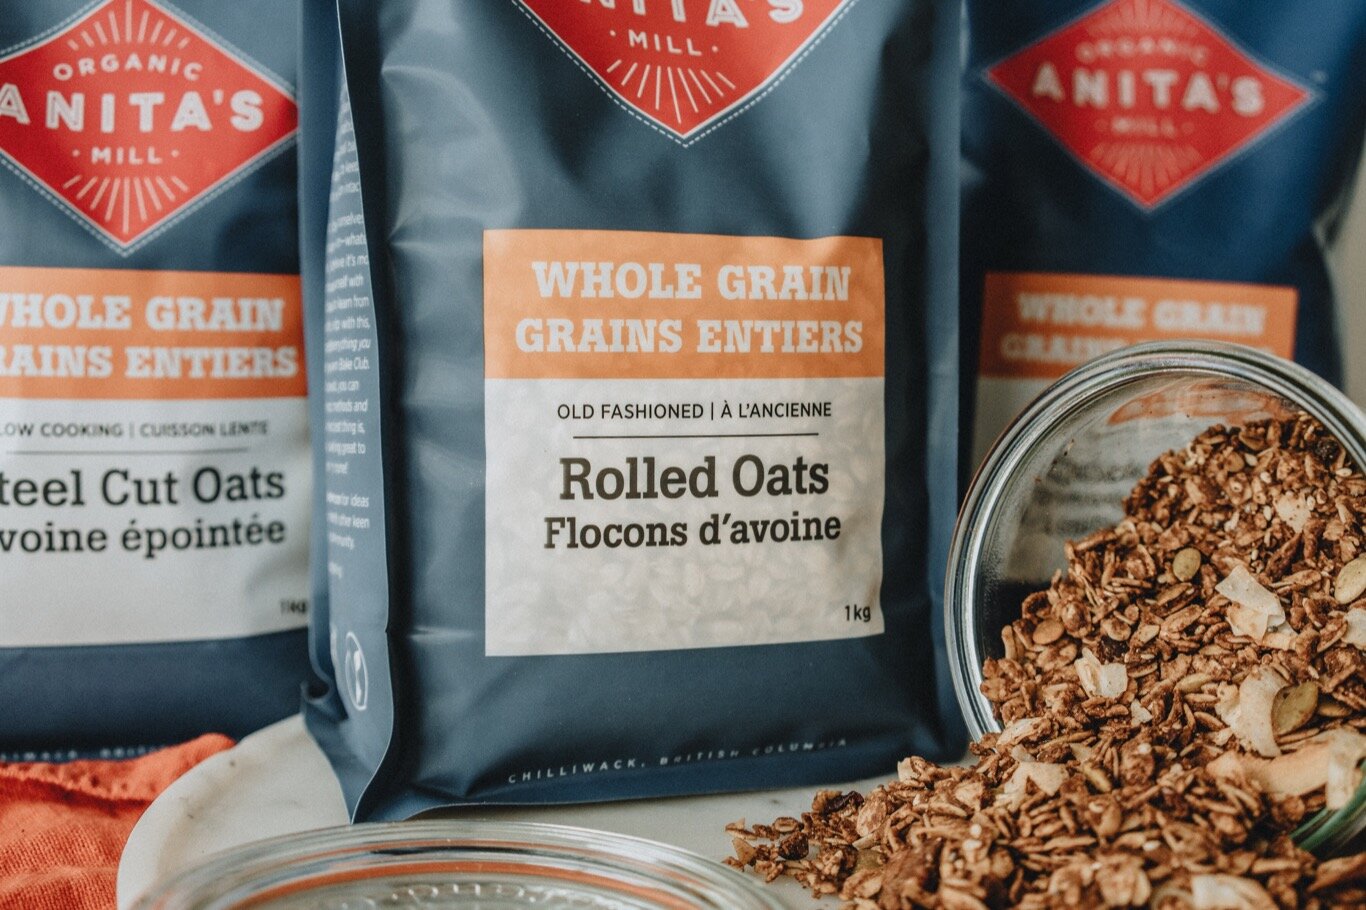 Anitas-Organic-Mill-Product-2020-whole-grain-rolled-oats-with-granola-pouring-out-web.jpg